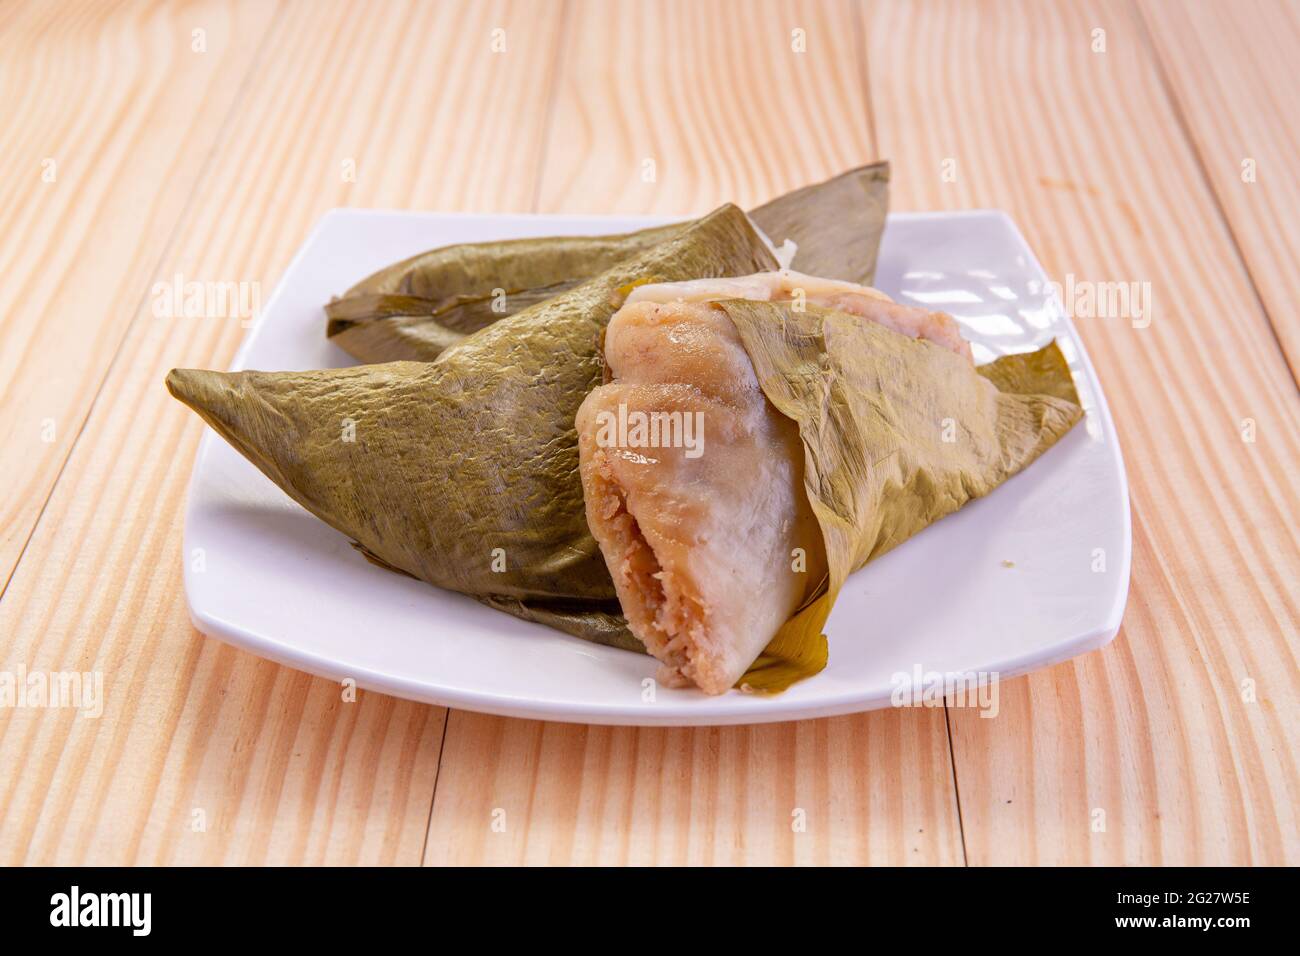 Ela Ada or Steamed sweet rice  dumblings,steamed rice cakes wrapped in banana leaf,Kerala traditional snacks item, arranged in a white ceramic plate Stock Photo